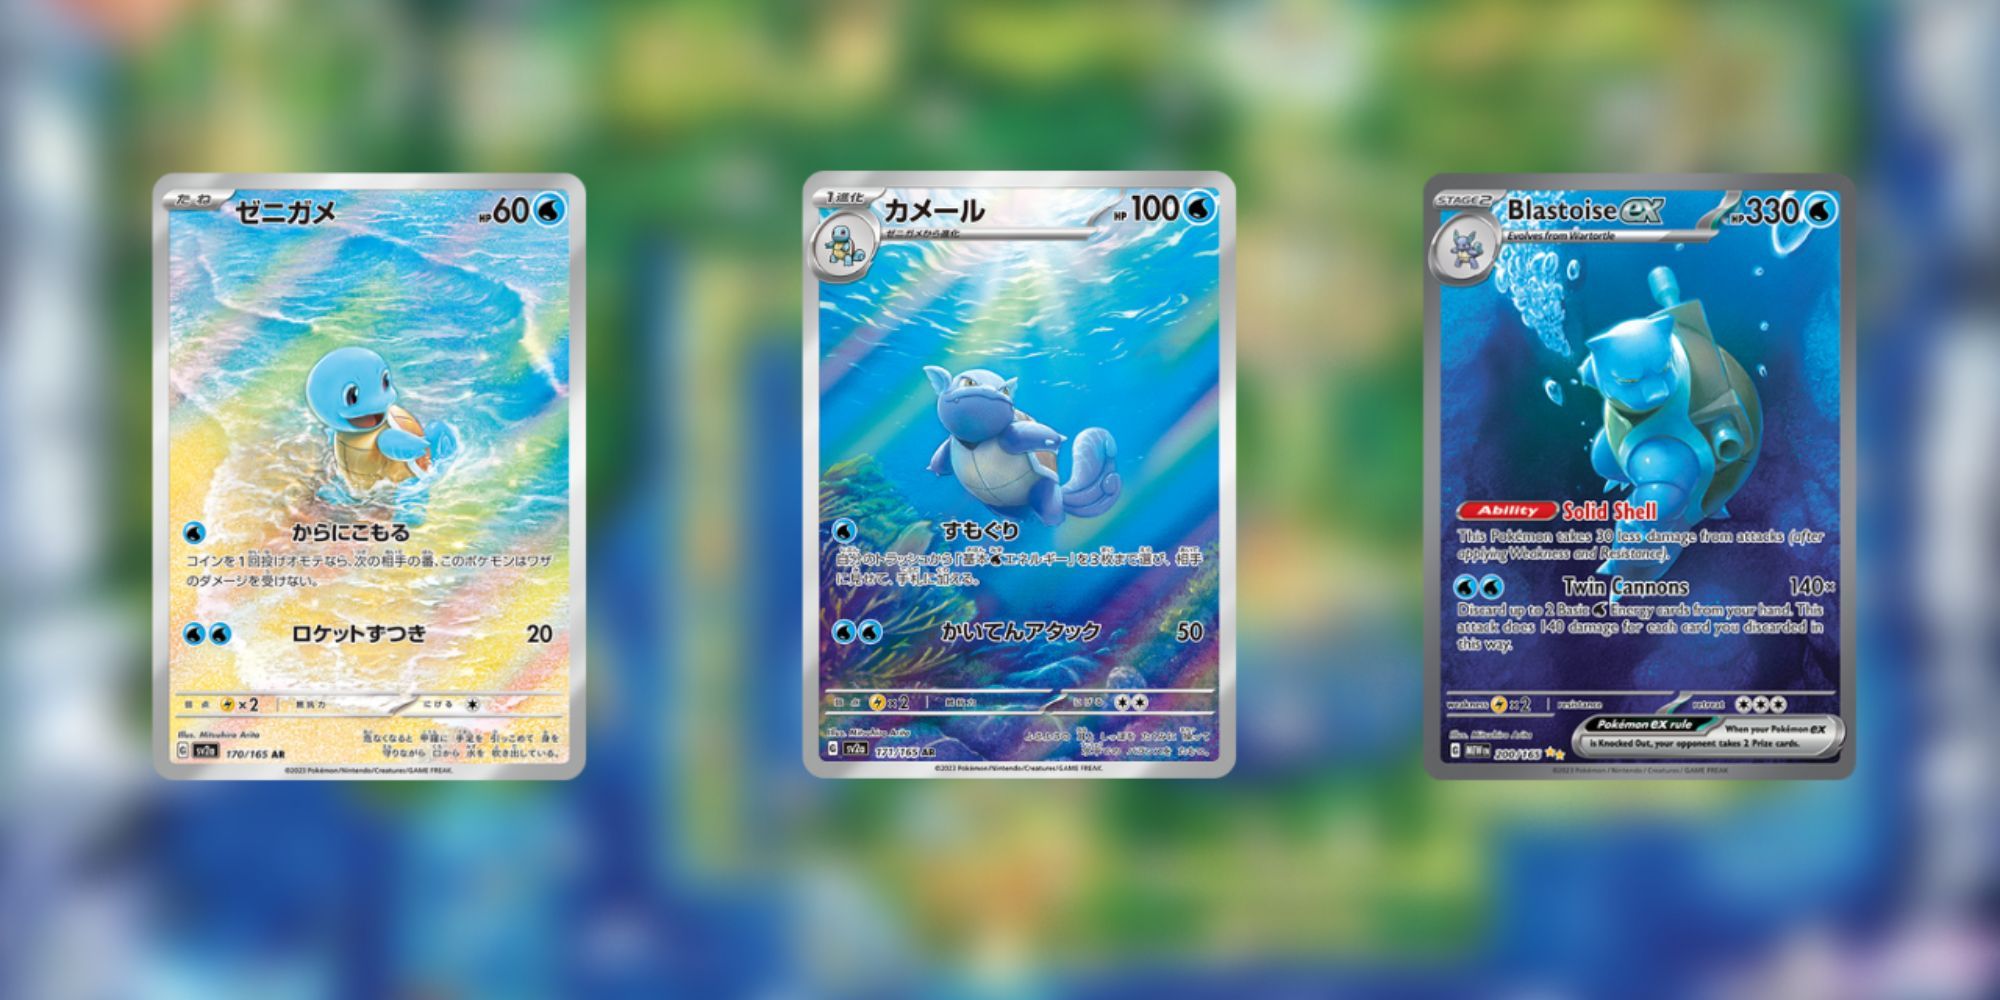 Here are the top 20 Pokémon cards from the latest set, Scarlet & Violet  151! How many cards do you own from this list? Follow me @tc